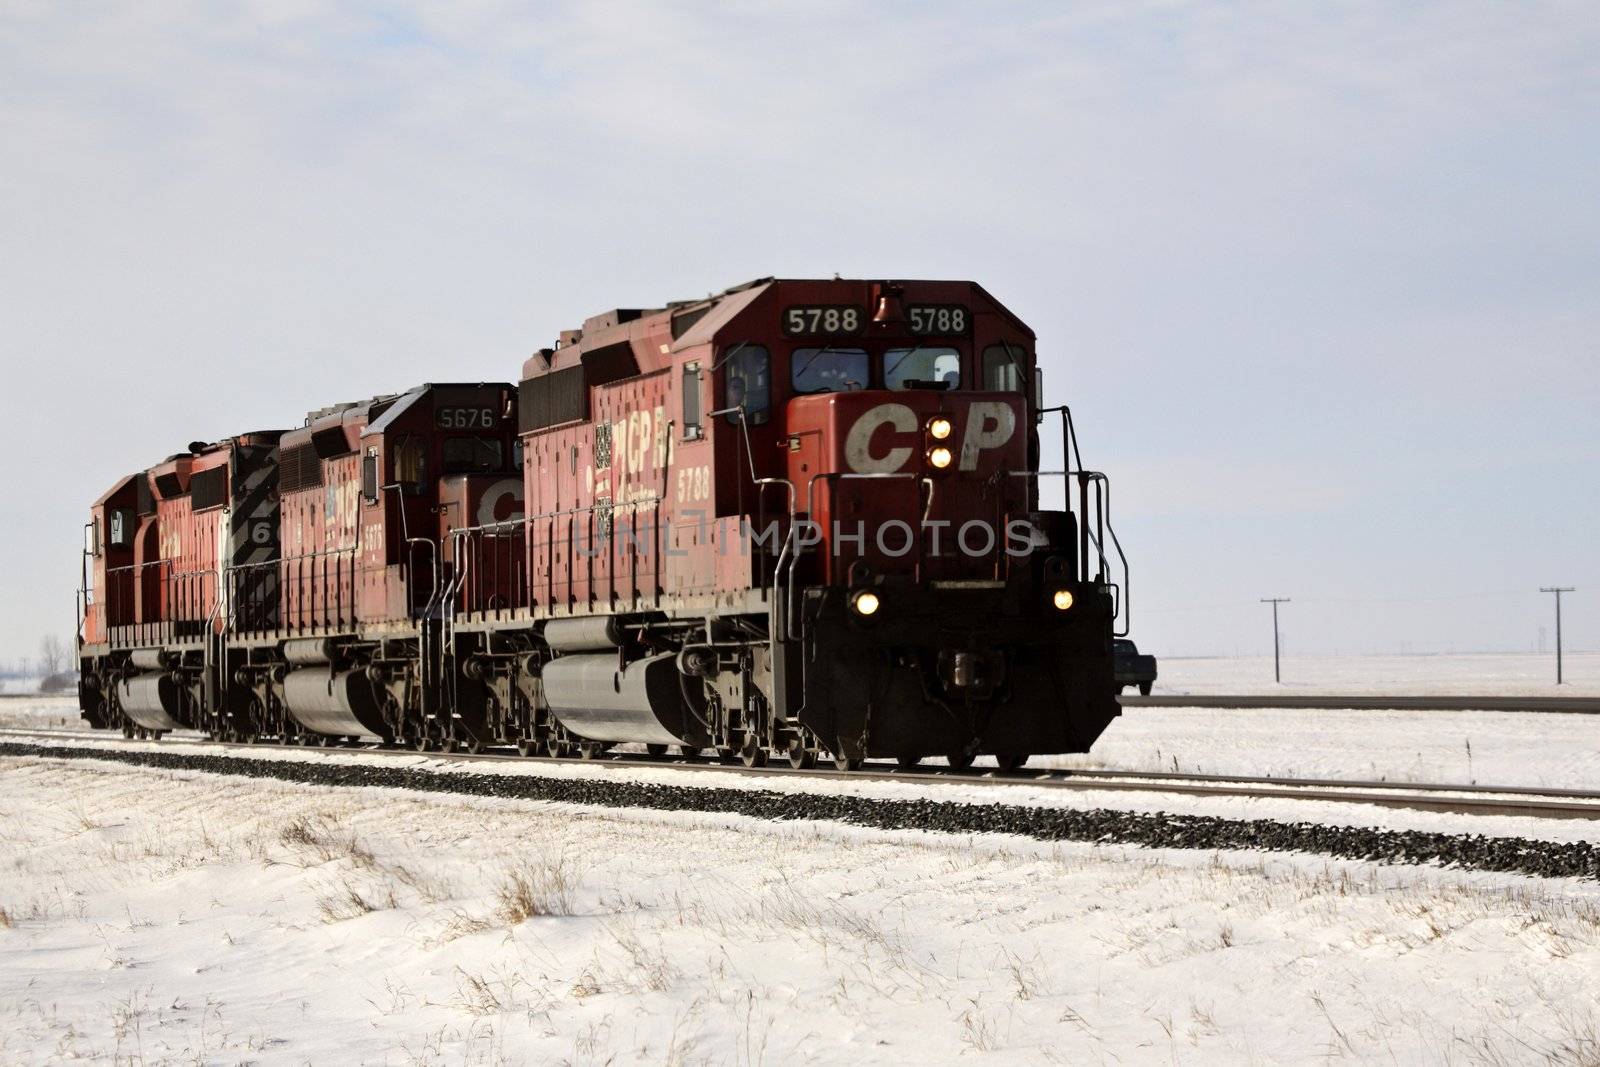 Canadian Pacific Railway CPR is a transcontinental railway, and transportation system, that operates from Montreal to Vancouver and extends into the United States